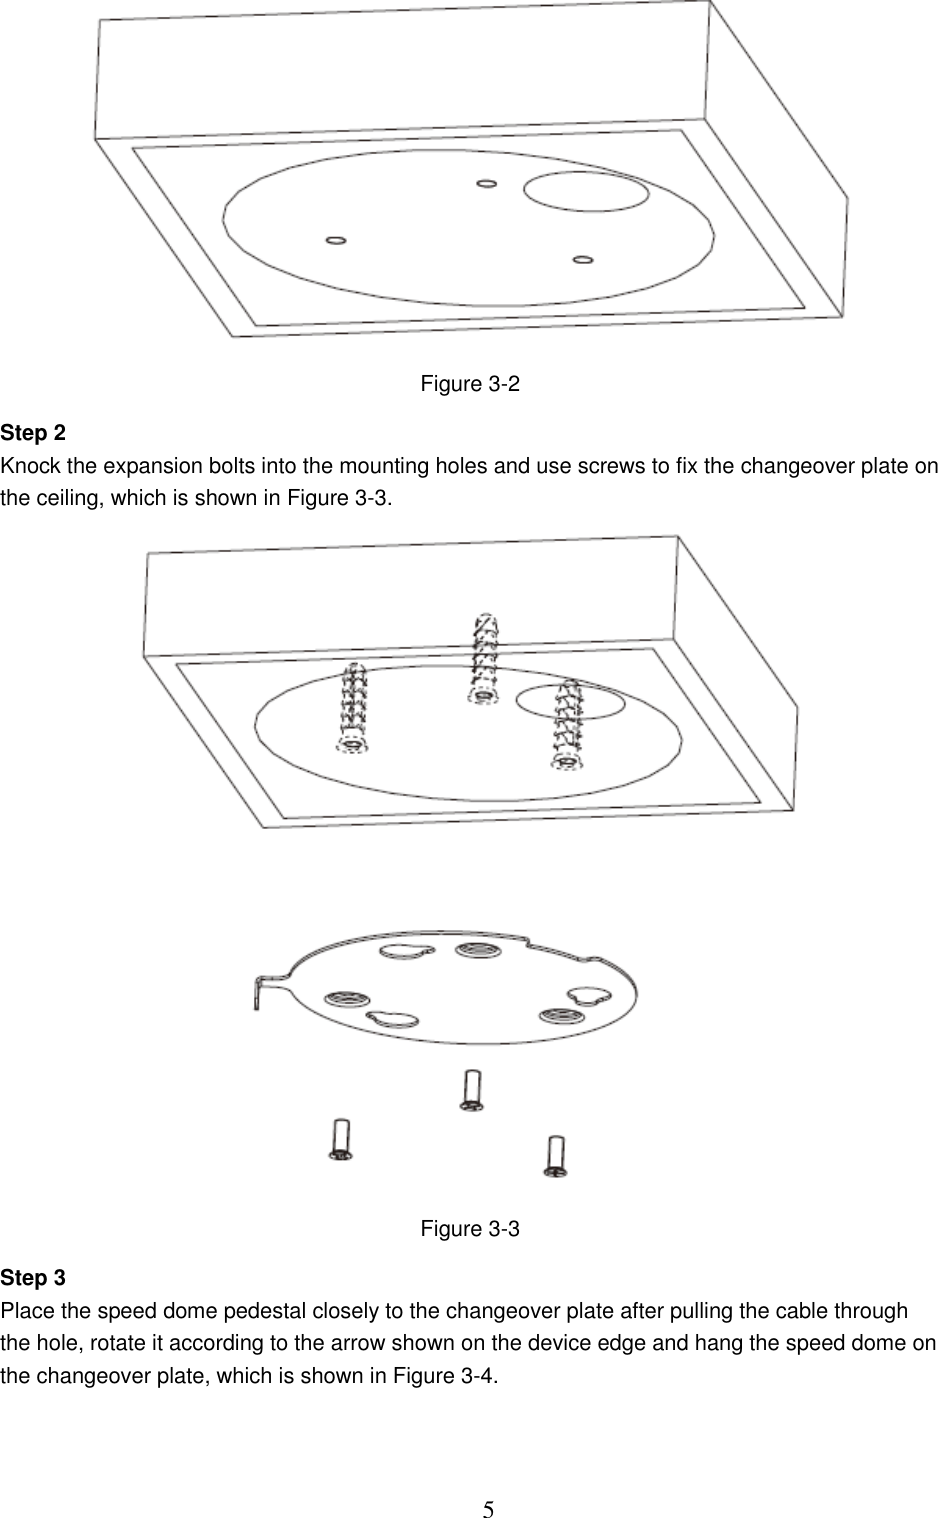  5  Figure 3-2 Step 2 Knock the expansion bolts into the mounting holes and use screws to fix the changeover plate on the ceiling, which is shown in Figure 3-3.  Figure 3-3 Step 3 Place the speed dome pedestal closely to the changeover plate after pulling the cable through the hole, rotate it according to the arrow shown on the device edge and hang the speed dome on the changeover plate, which is shown in Figure 3-4. 